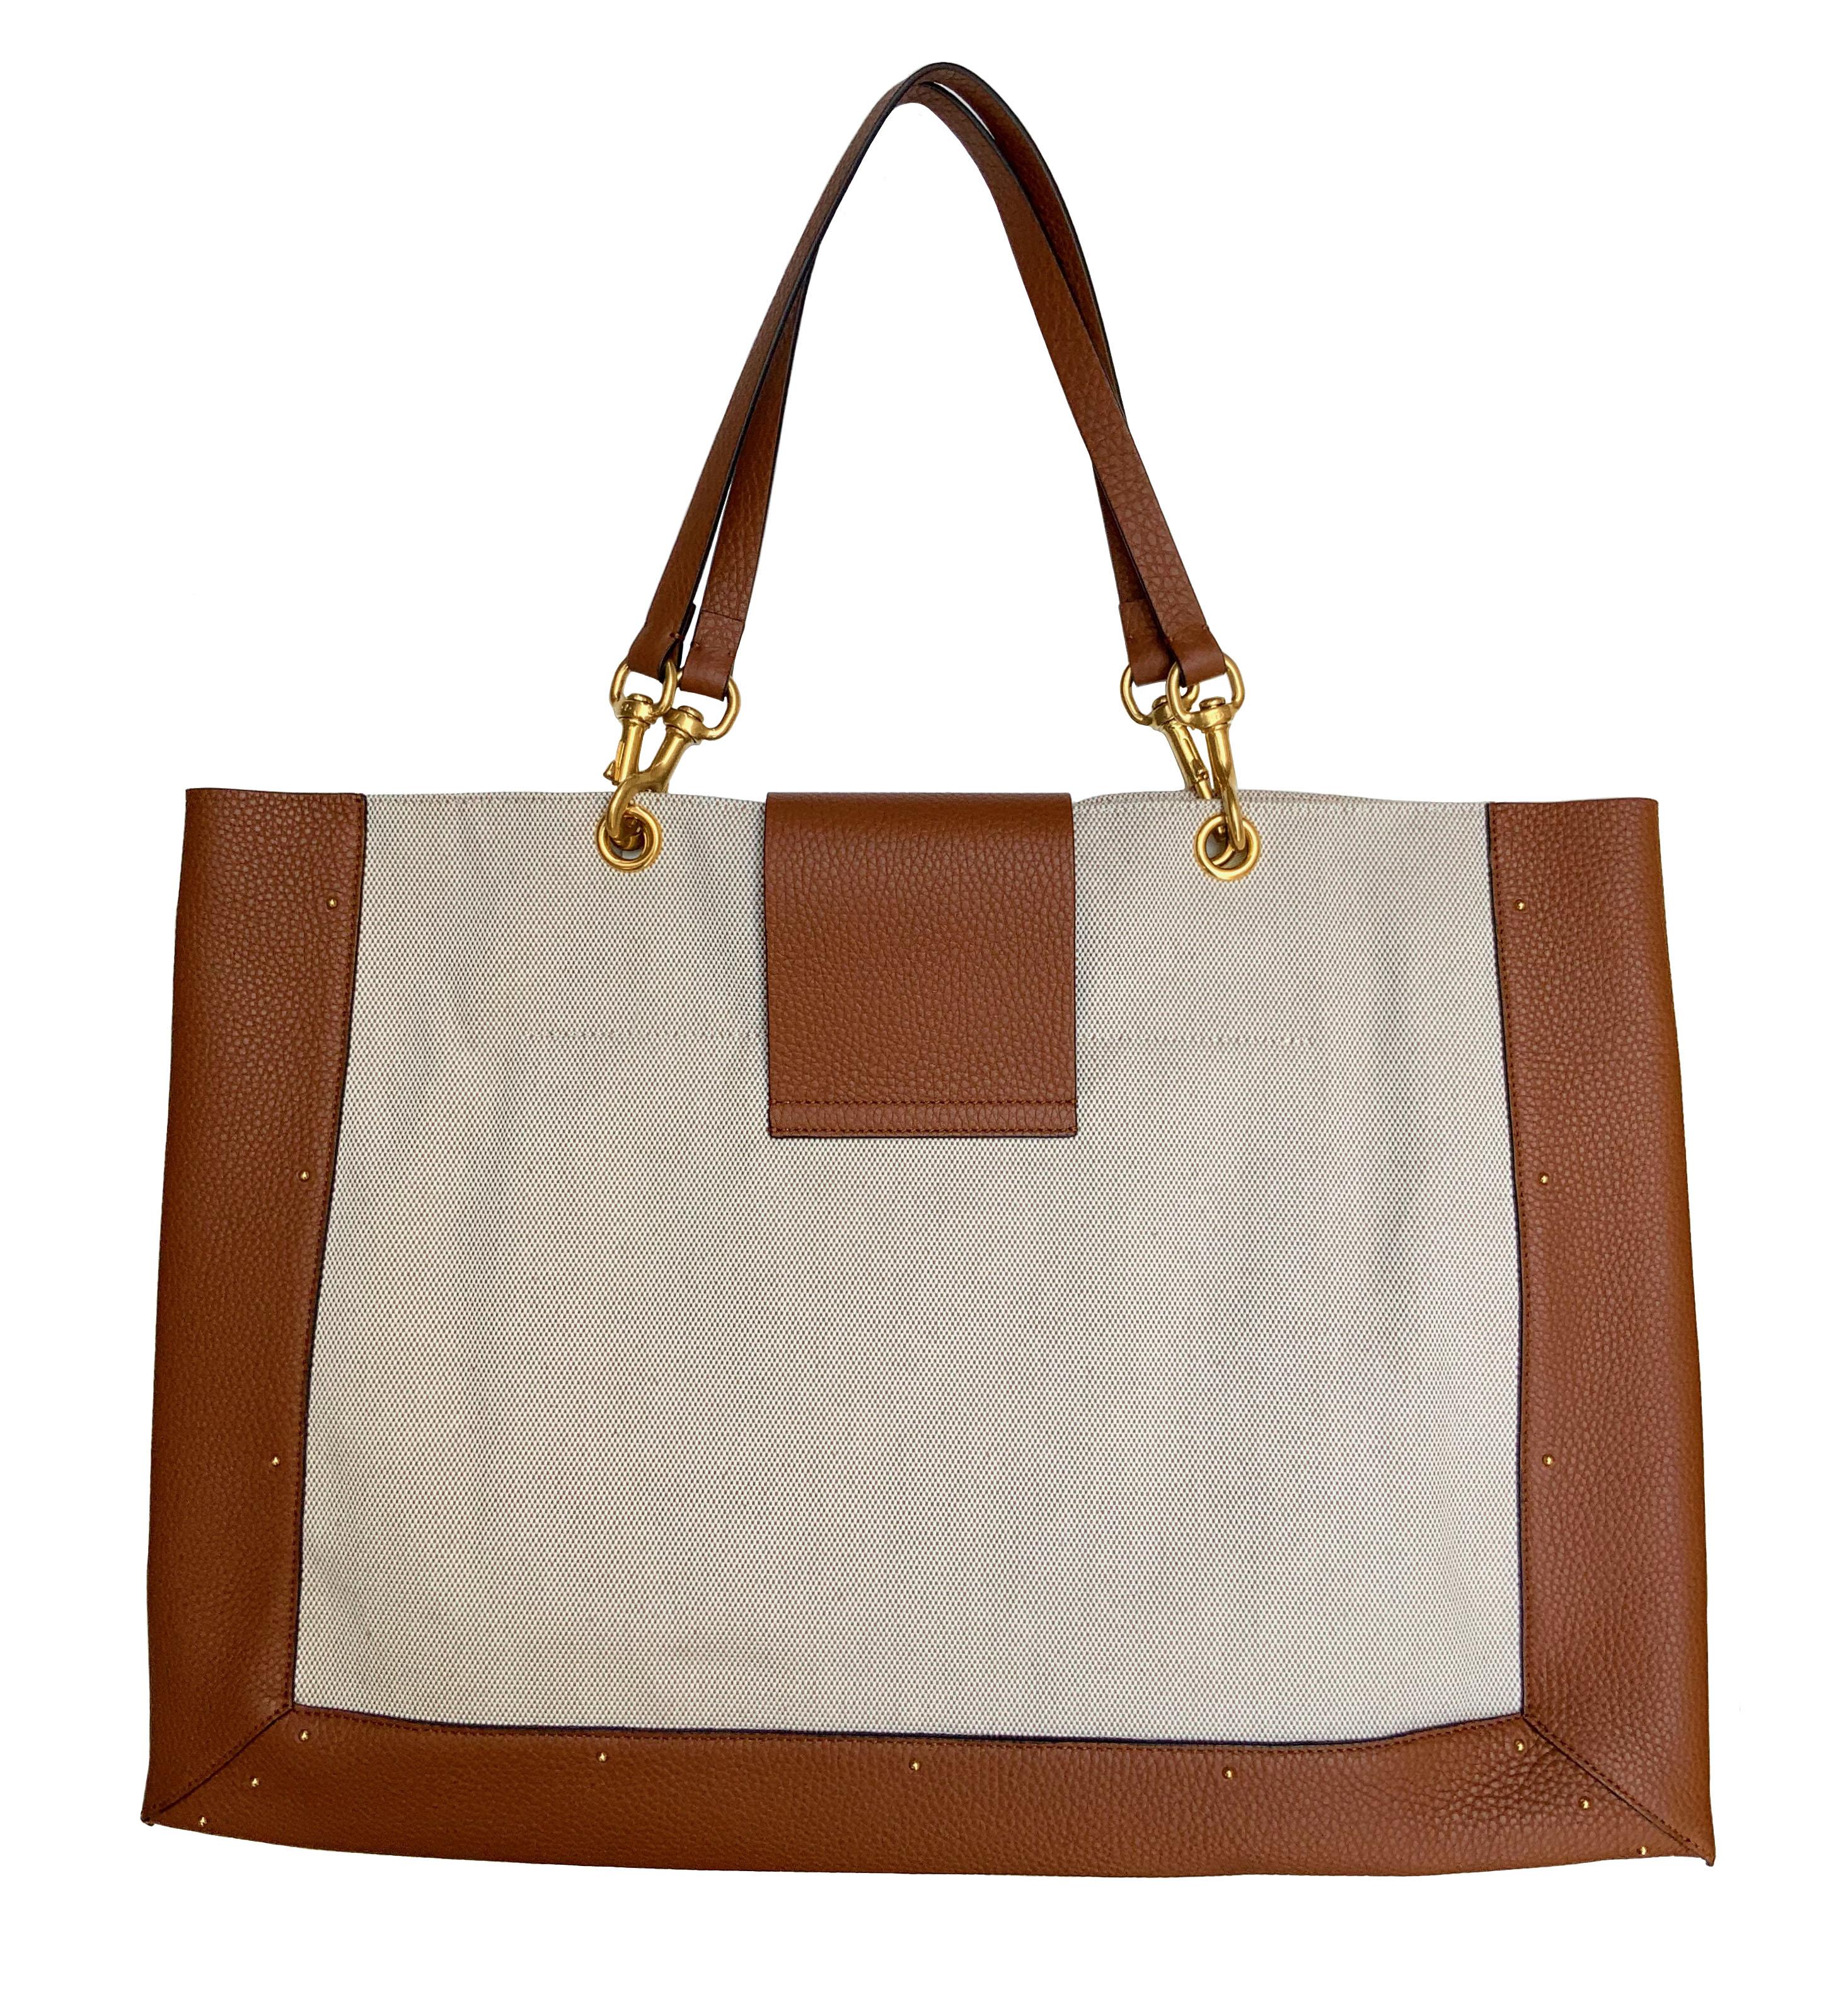 This pre-owned Valentino tote bag is crafted in beige canvas and trimmed with tan leather.
It features a logo plaque in a gold-tone on the front, a magnetic-tab fastening and an internal red leather zipped pocket.

Material: fabric, leather
Lining: